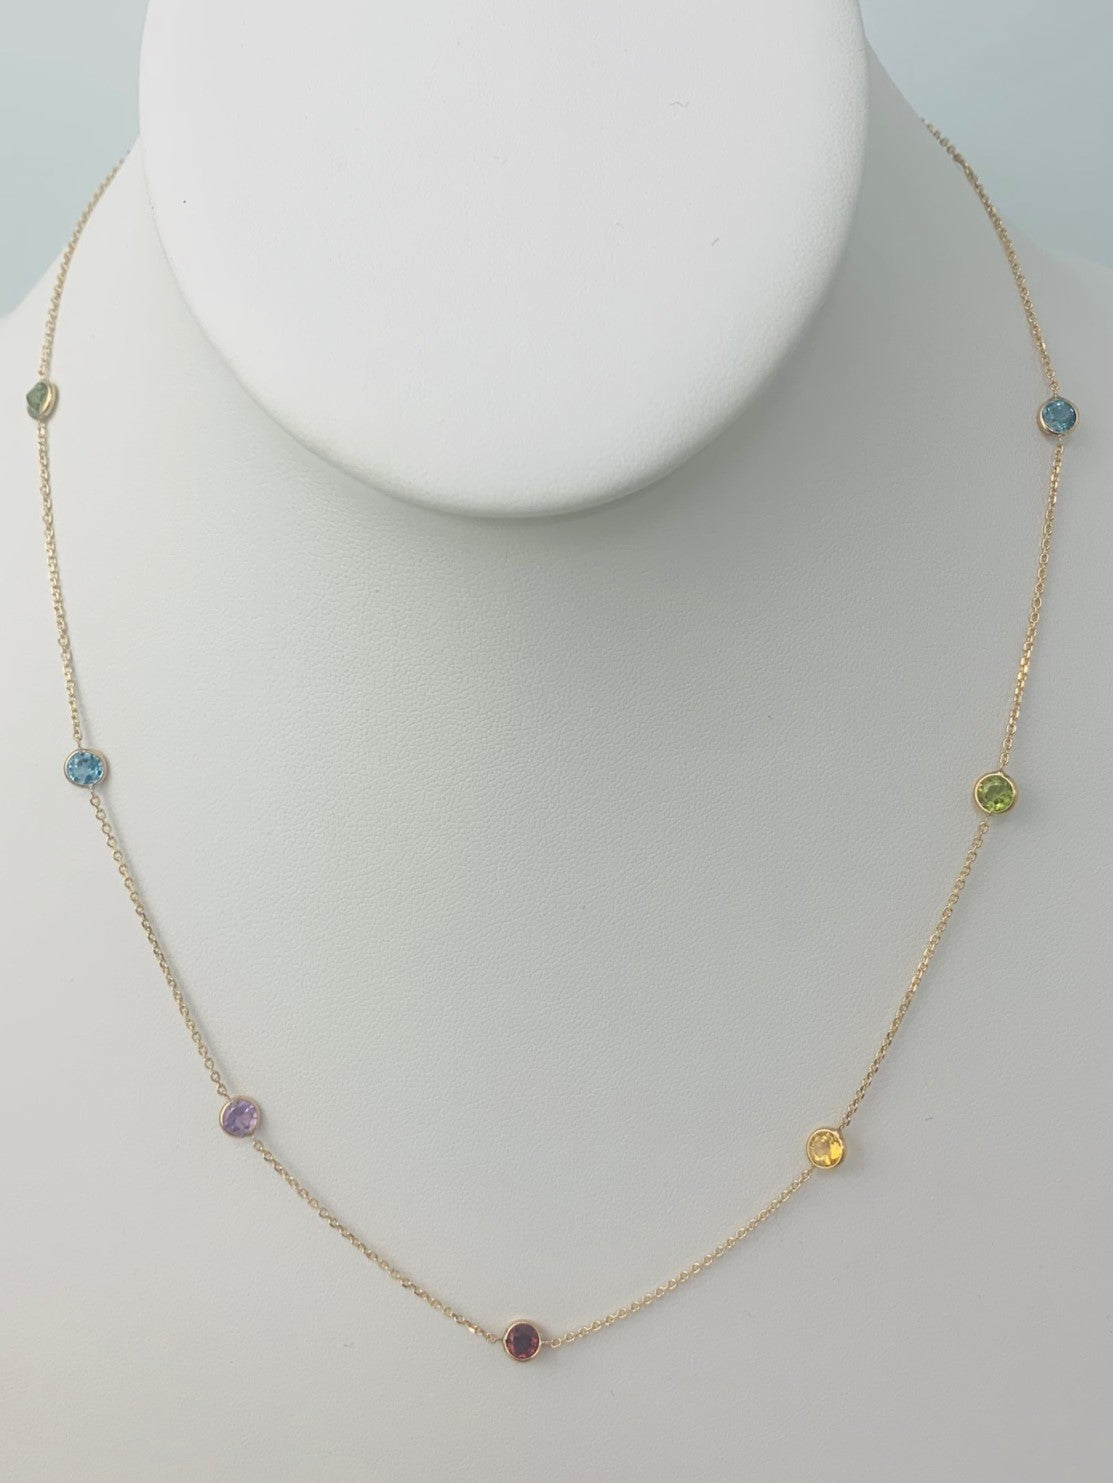 17"-18" 4mm 9 Station Round Multicolored Bezel Necklace in 14KY - NCK-171-BZGM14Y-MLTI-18-4A